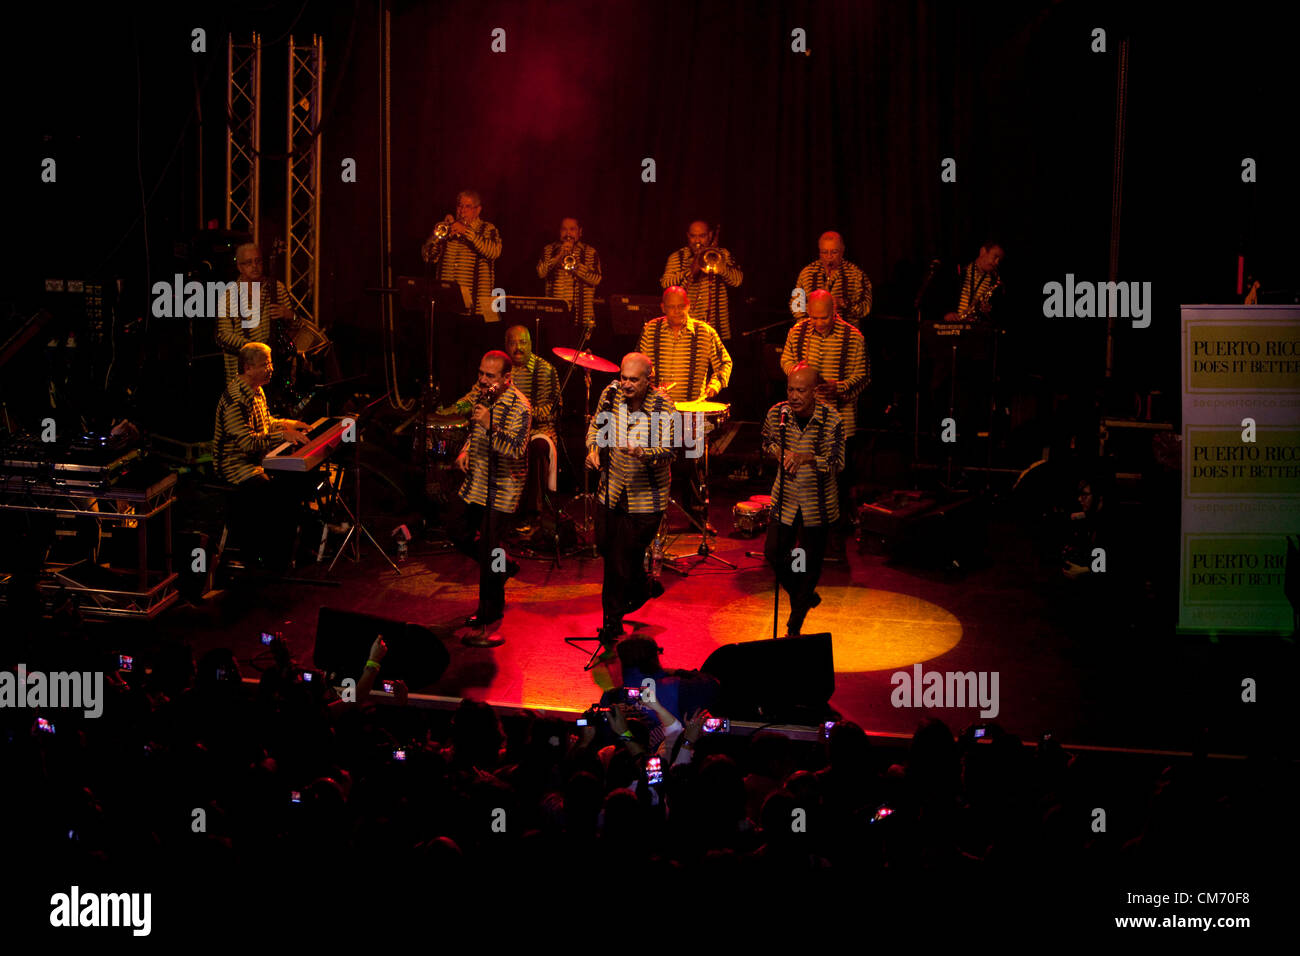 El Gran Combo de Puerto Rico, famous Puerto Rican salsa music orchestra, celebrates its 50th anniversary at Electric Brixton, London, England- Thursday, October the 18th, 2012. Stock Photo